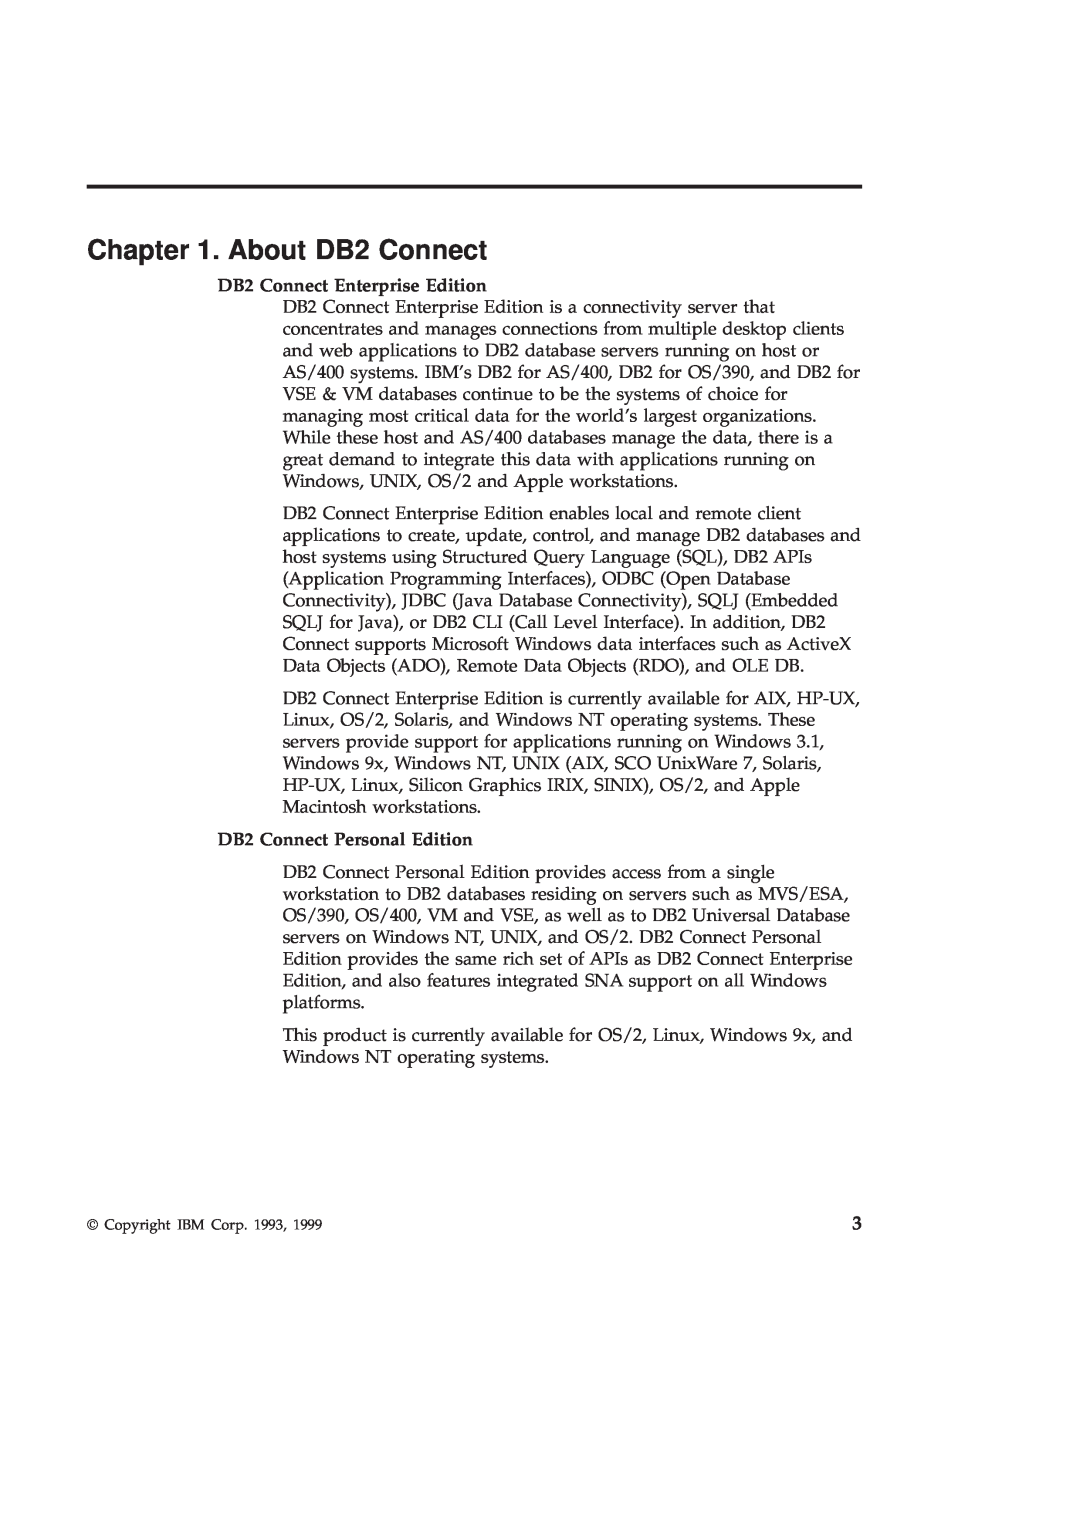 IBM GC09-2830-00 manual About DB2 Connect, DB2 Connect Enterprise Edition, DB2 Connect Personal Edition 